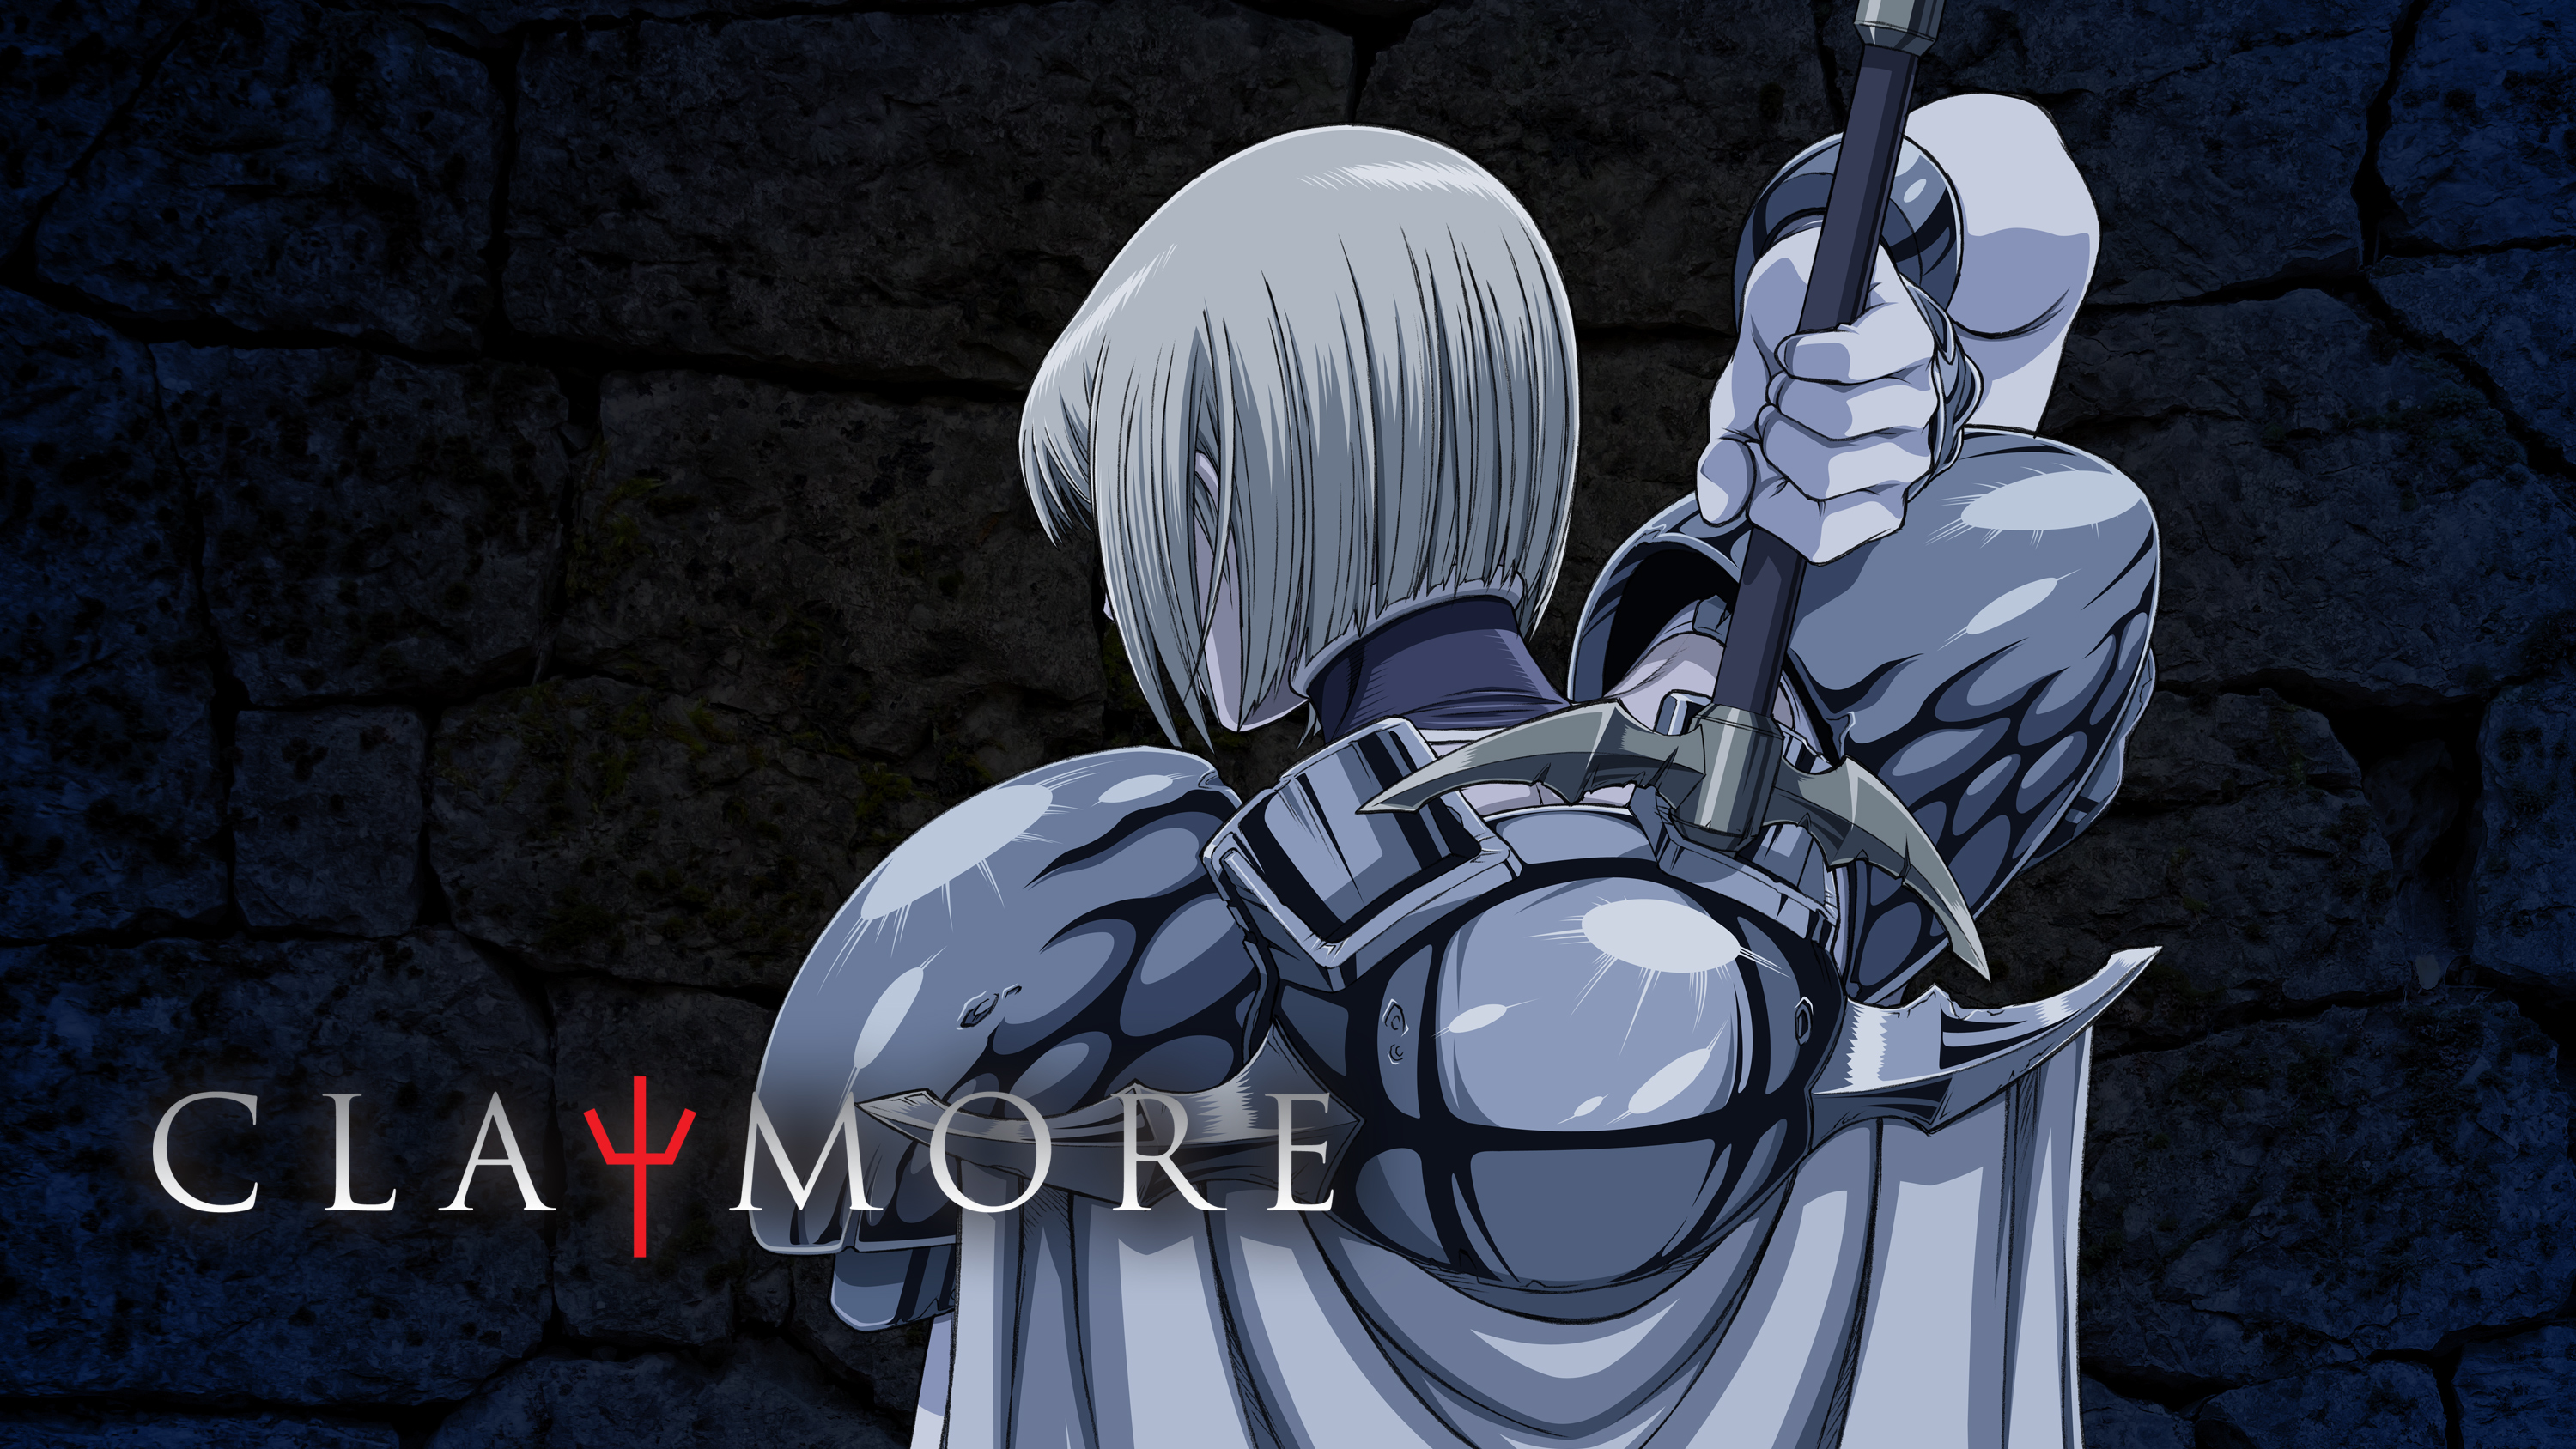 Watch Claymore Sub Dub Action Adventure Fantasy Anime Funimation In this world, humans coexist with demonic predators called yoma. watch claymore sub dub action